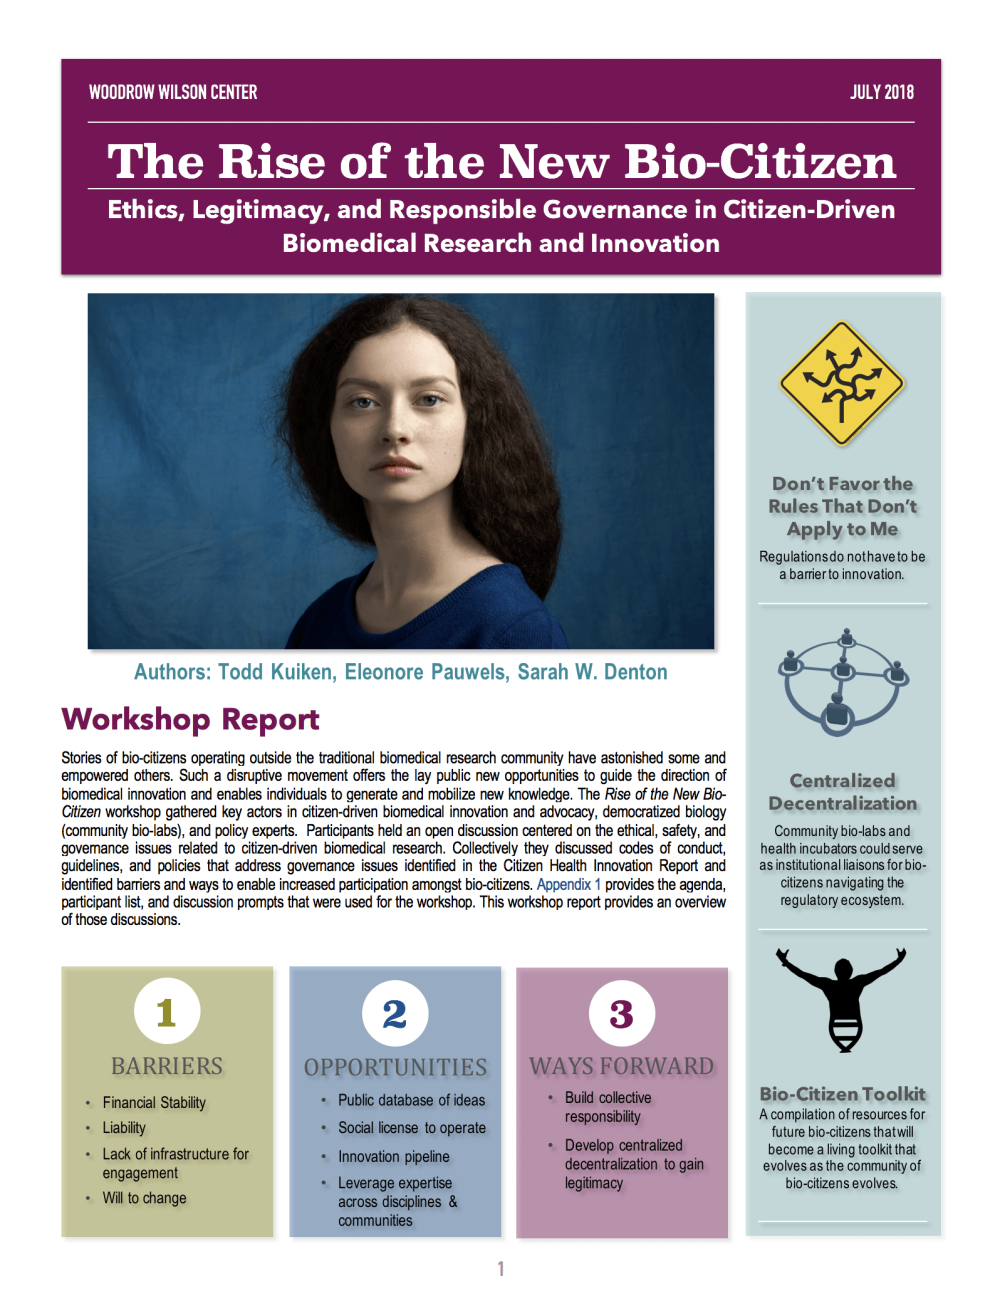 The Rise of the New Bio-Citizen Infographic